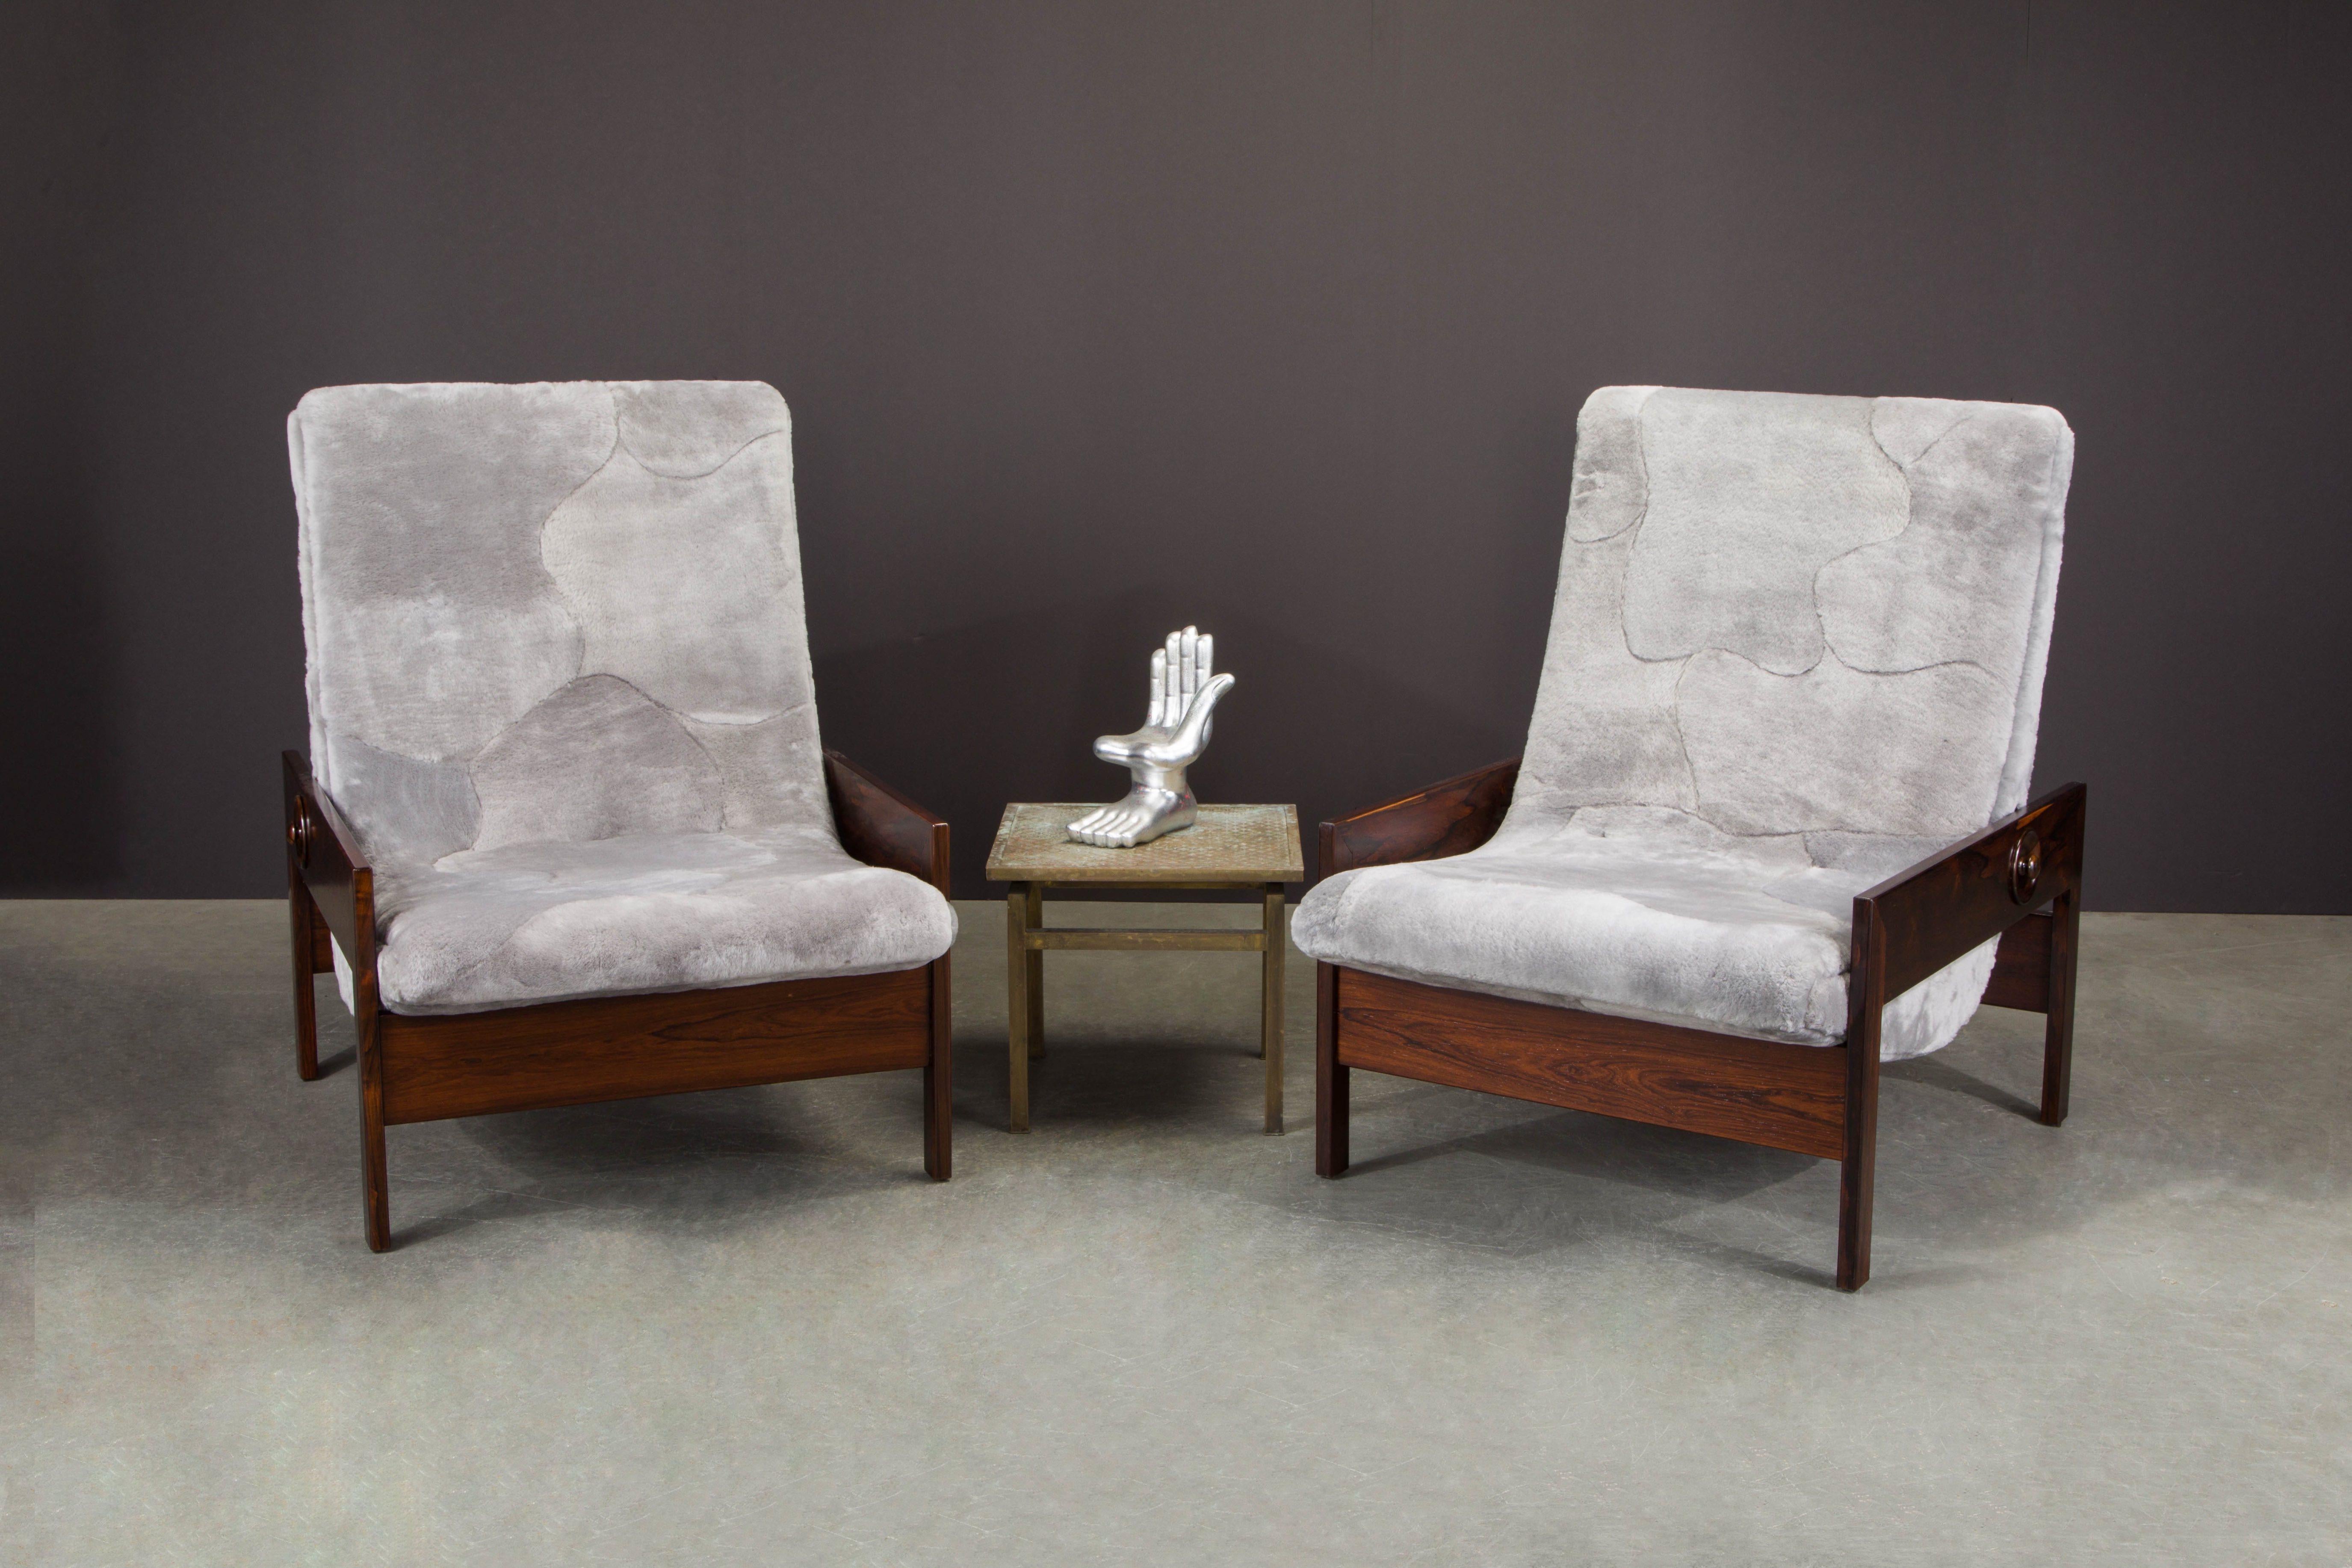 Brazilian Sergio Rodrigues 'Gio' Chairs in Rosewood and Edelman Shearling, 1960s Brazil